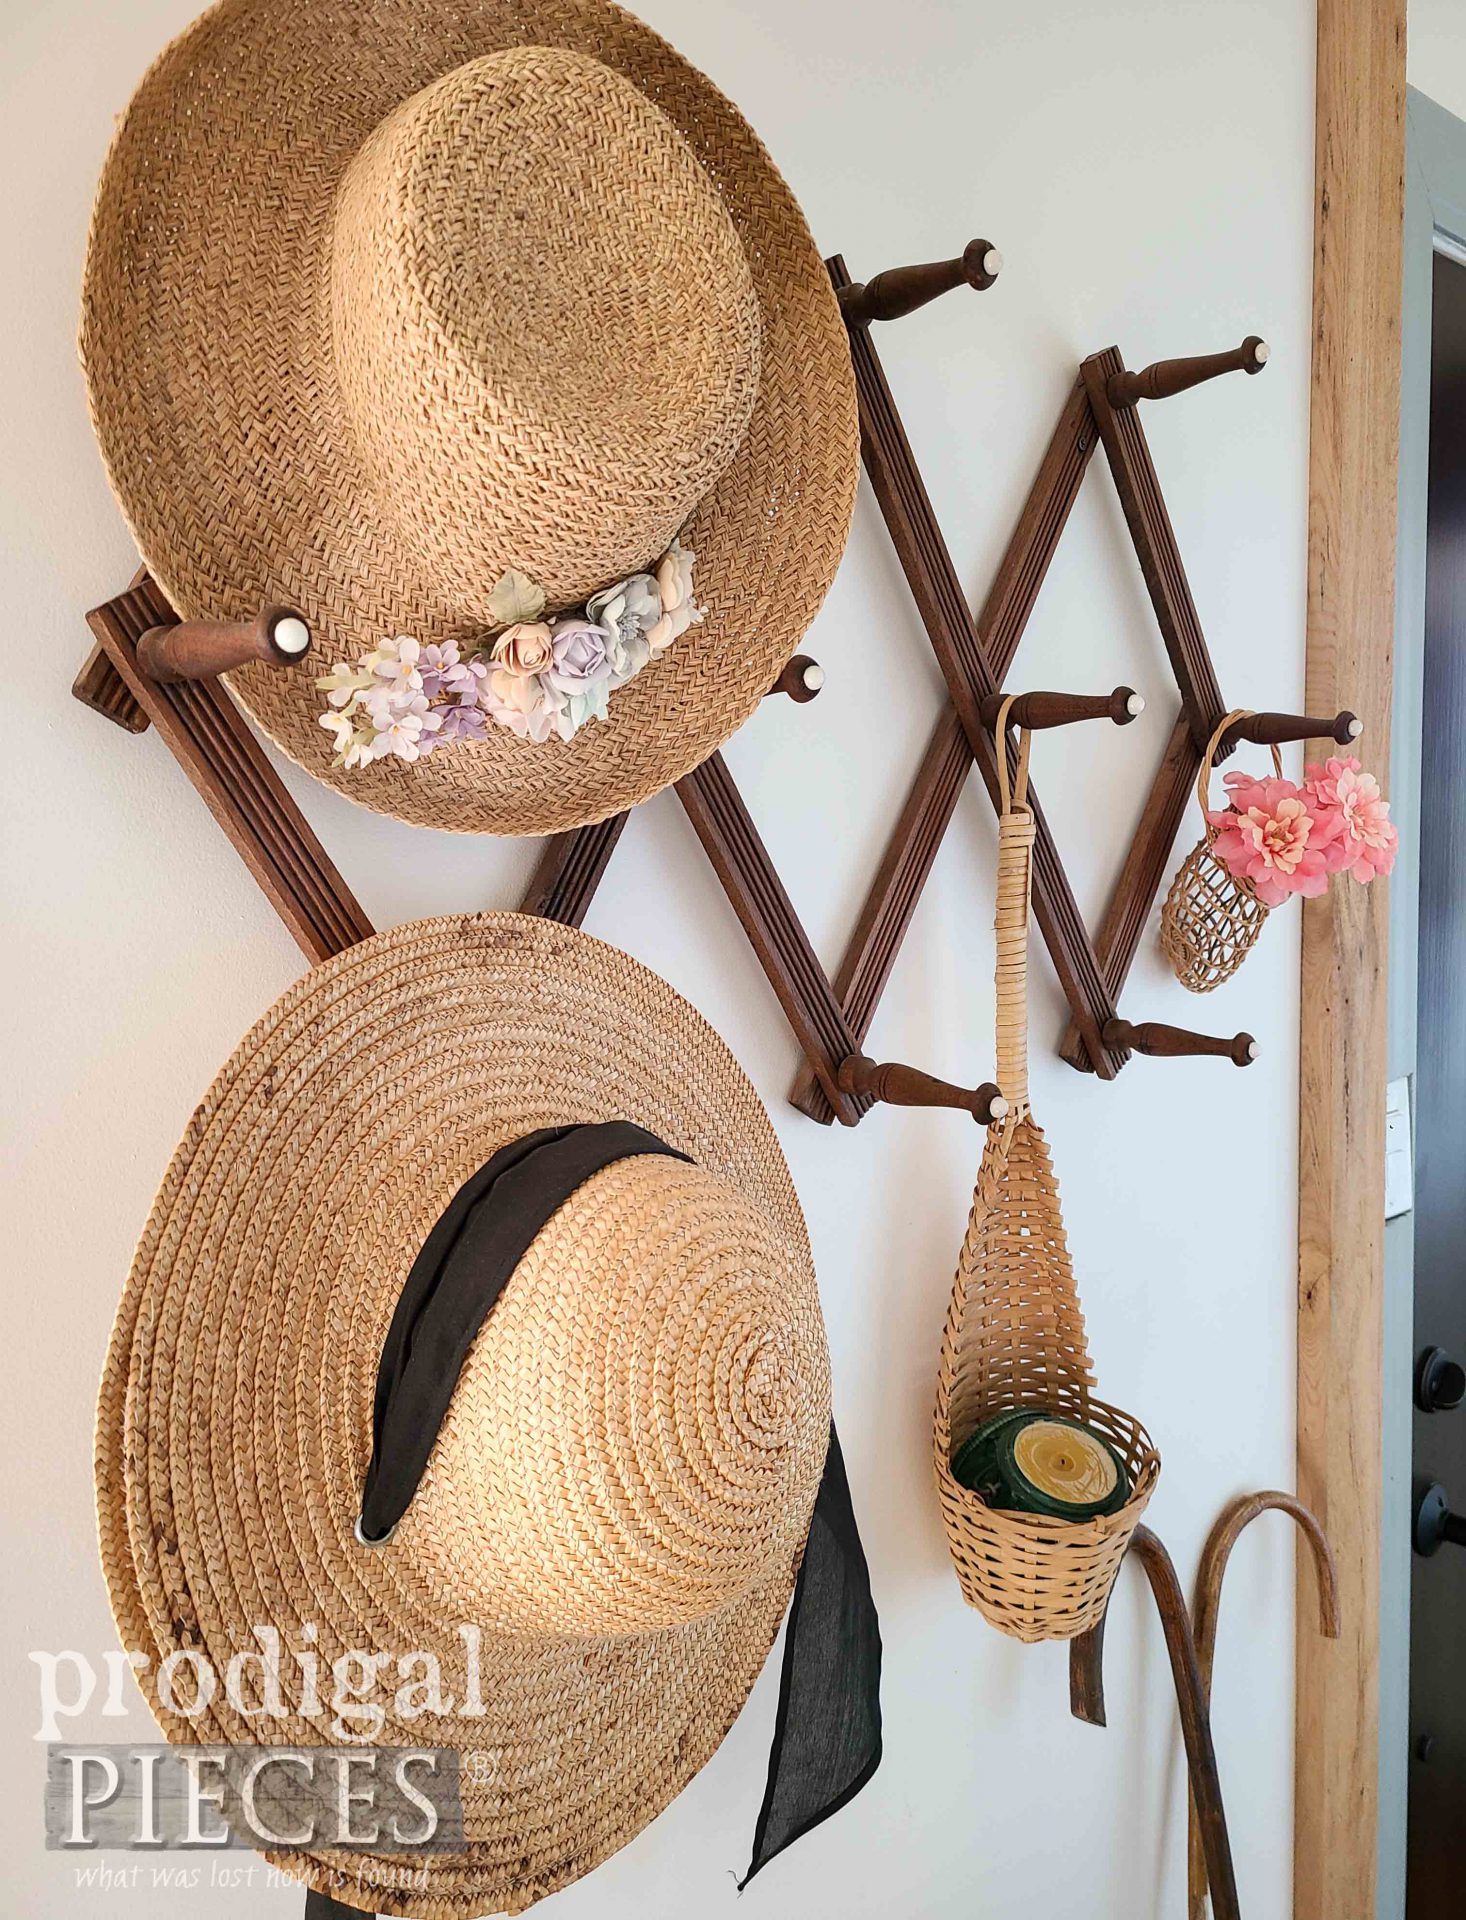 Staw Hats Hangin in Entry | prodigalpieces.com #prodigalpieces #interiordesign #home #farmhouse